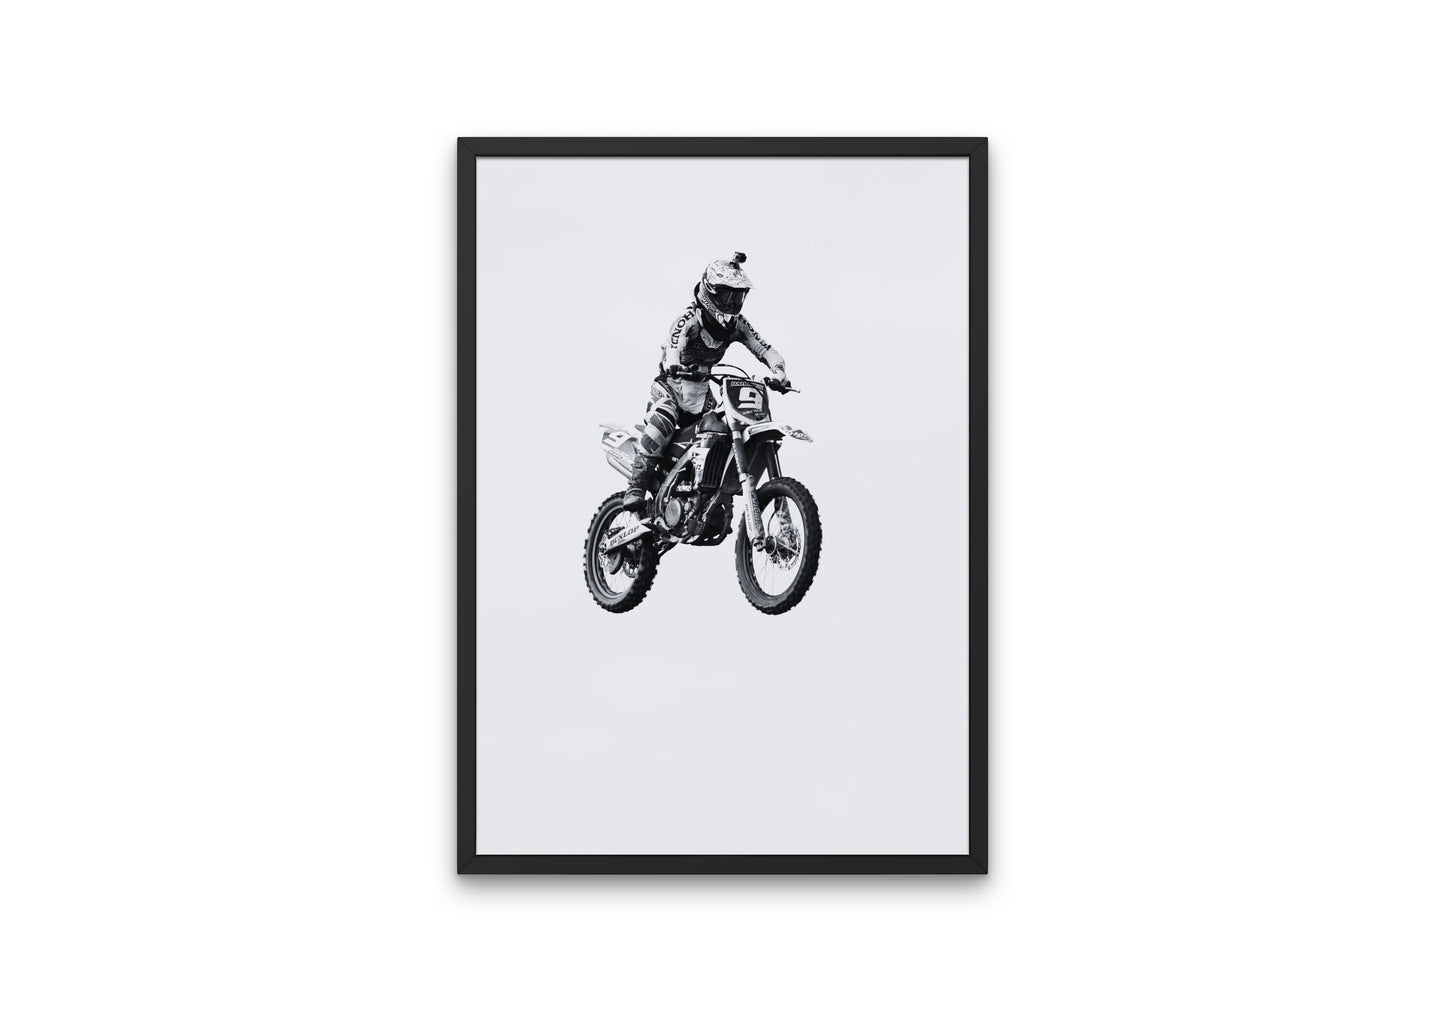 Black and White Motorcycle Poster INSTANT DOWNLOAD, mountain bike art, dirt bike gift, sports poster, bike poster, sport motivation poster